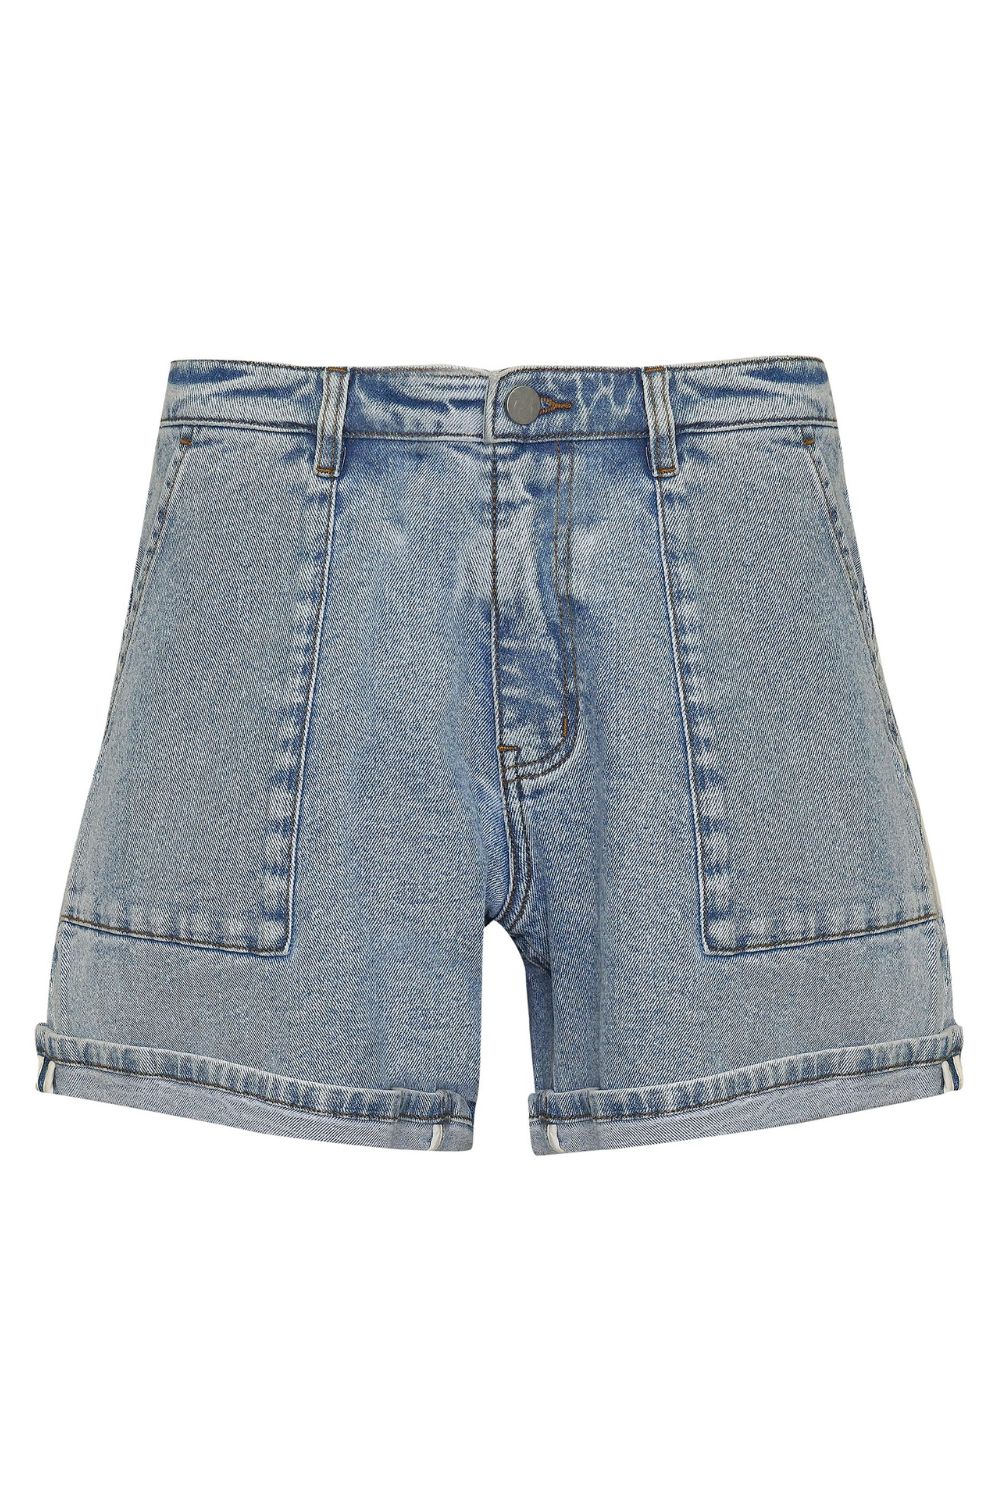 blue denim, shorts, cuffed leg, top stitched pockets, mid rise, product image